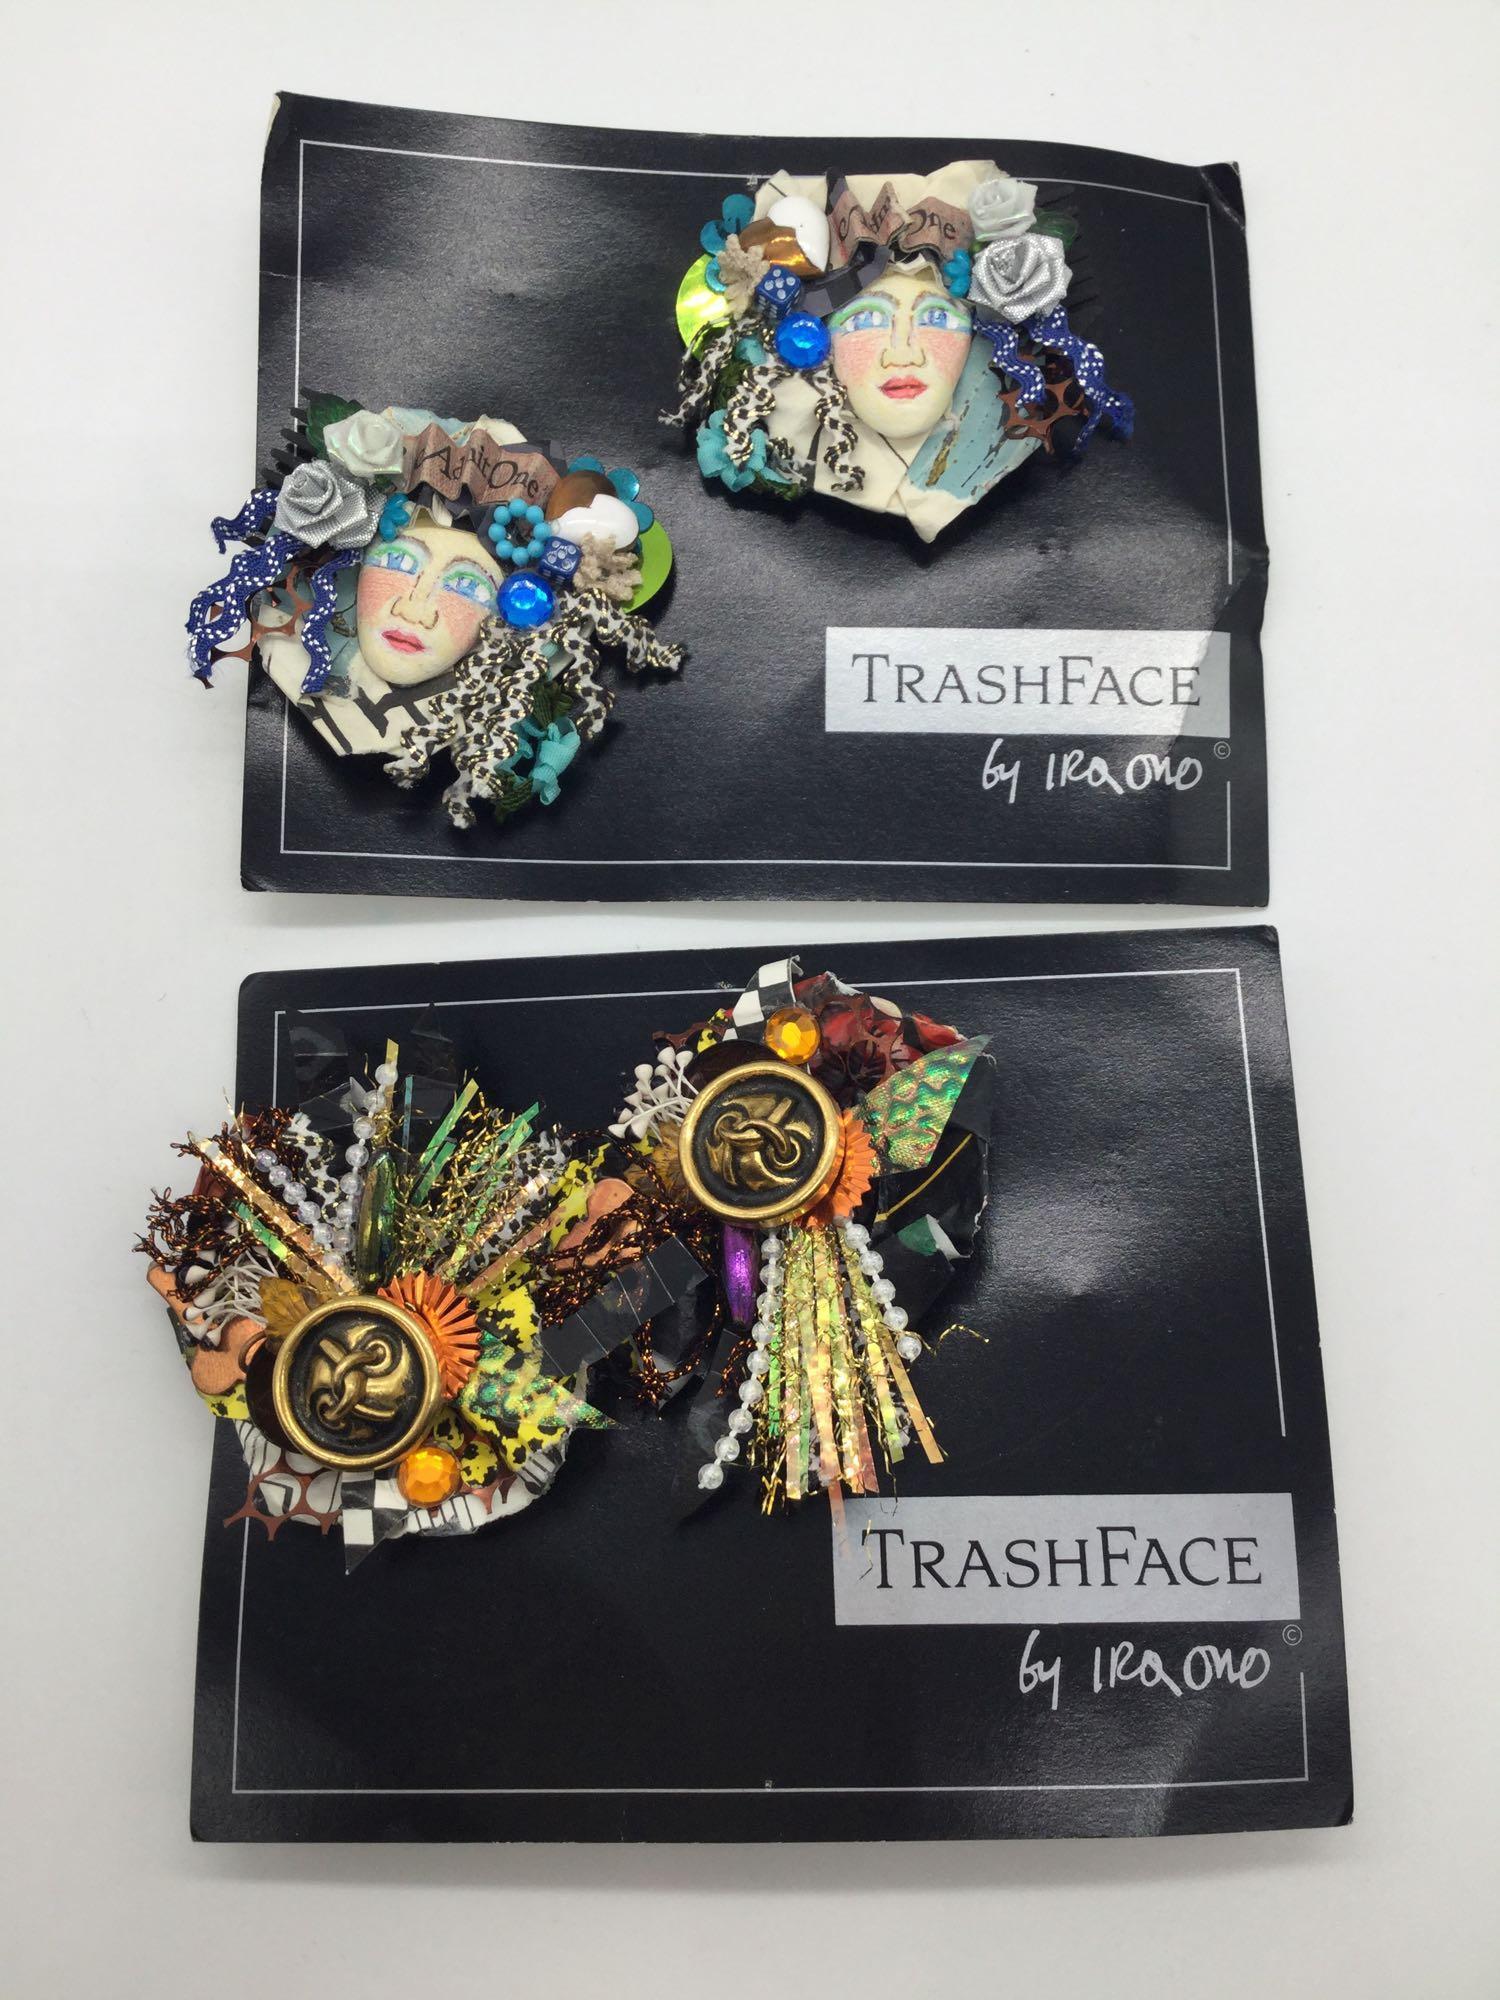 2 pairs of high end art jewelry from the Trash Face line by acclaimed Hawaiian artist Ira Ono.